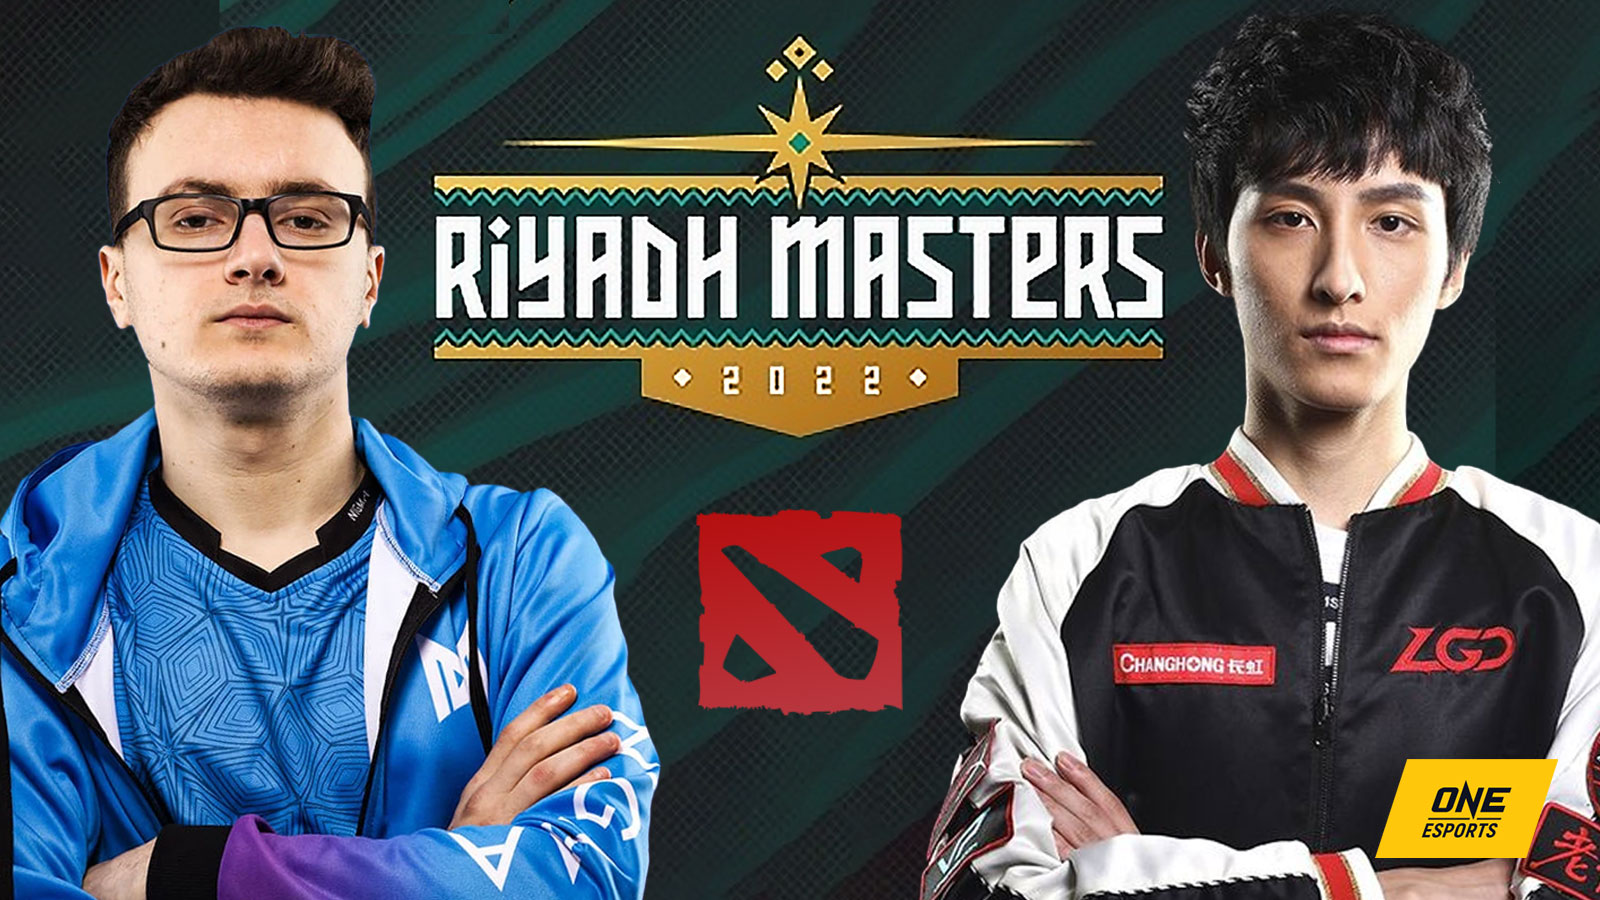 Riyadh Masters Dota 2 schedule and results | ONE Esports